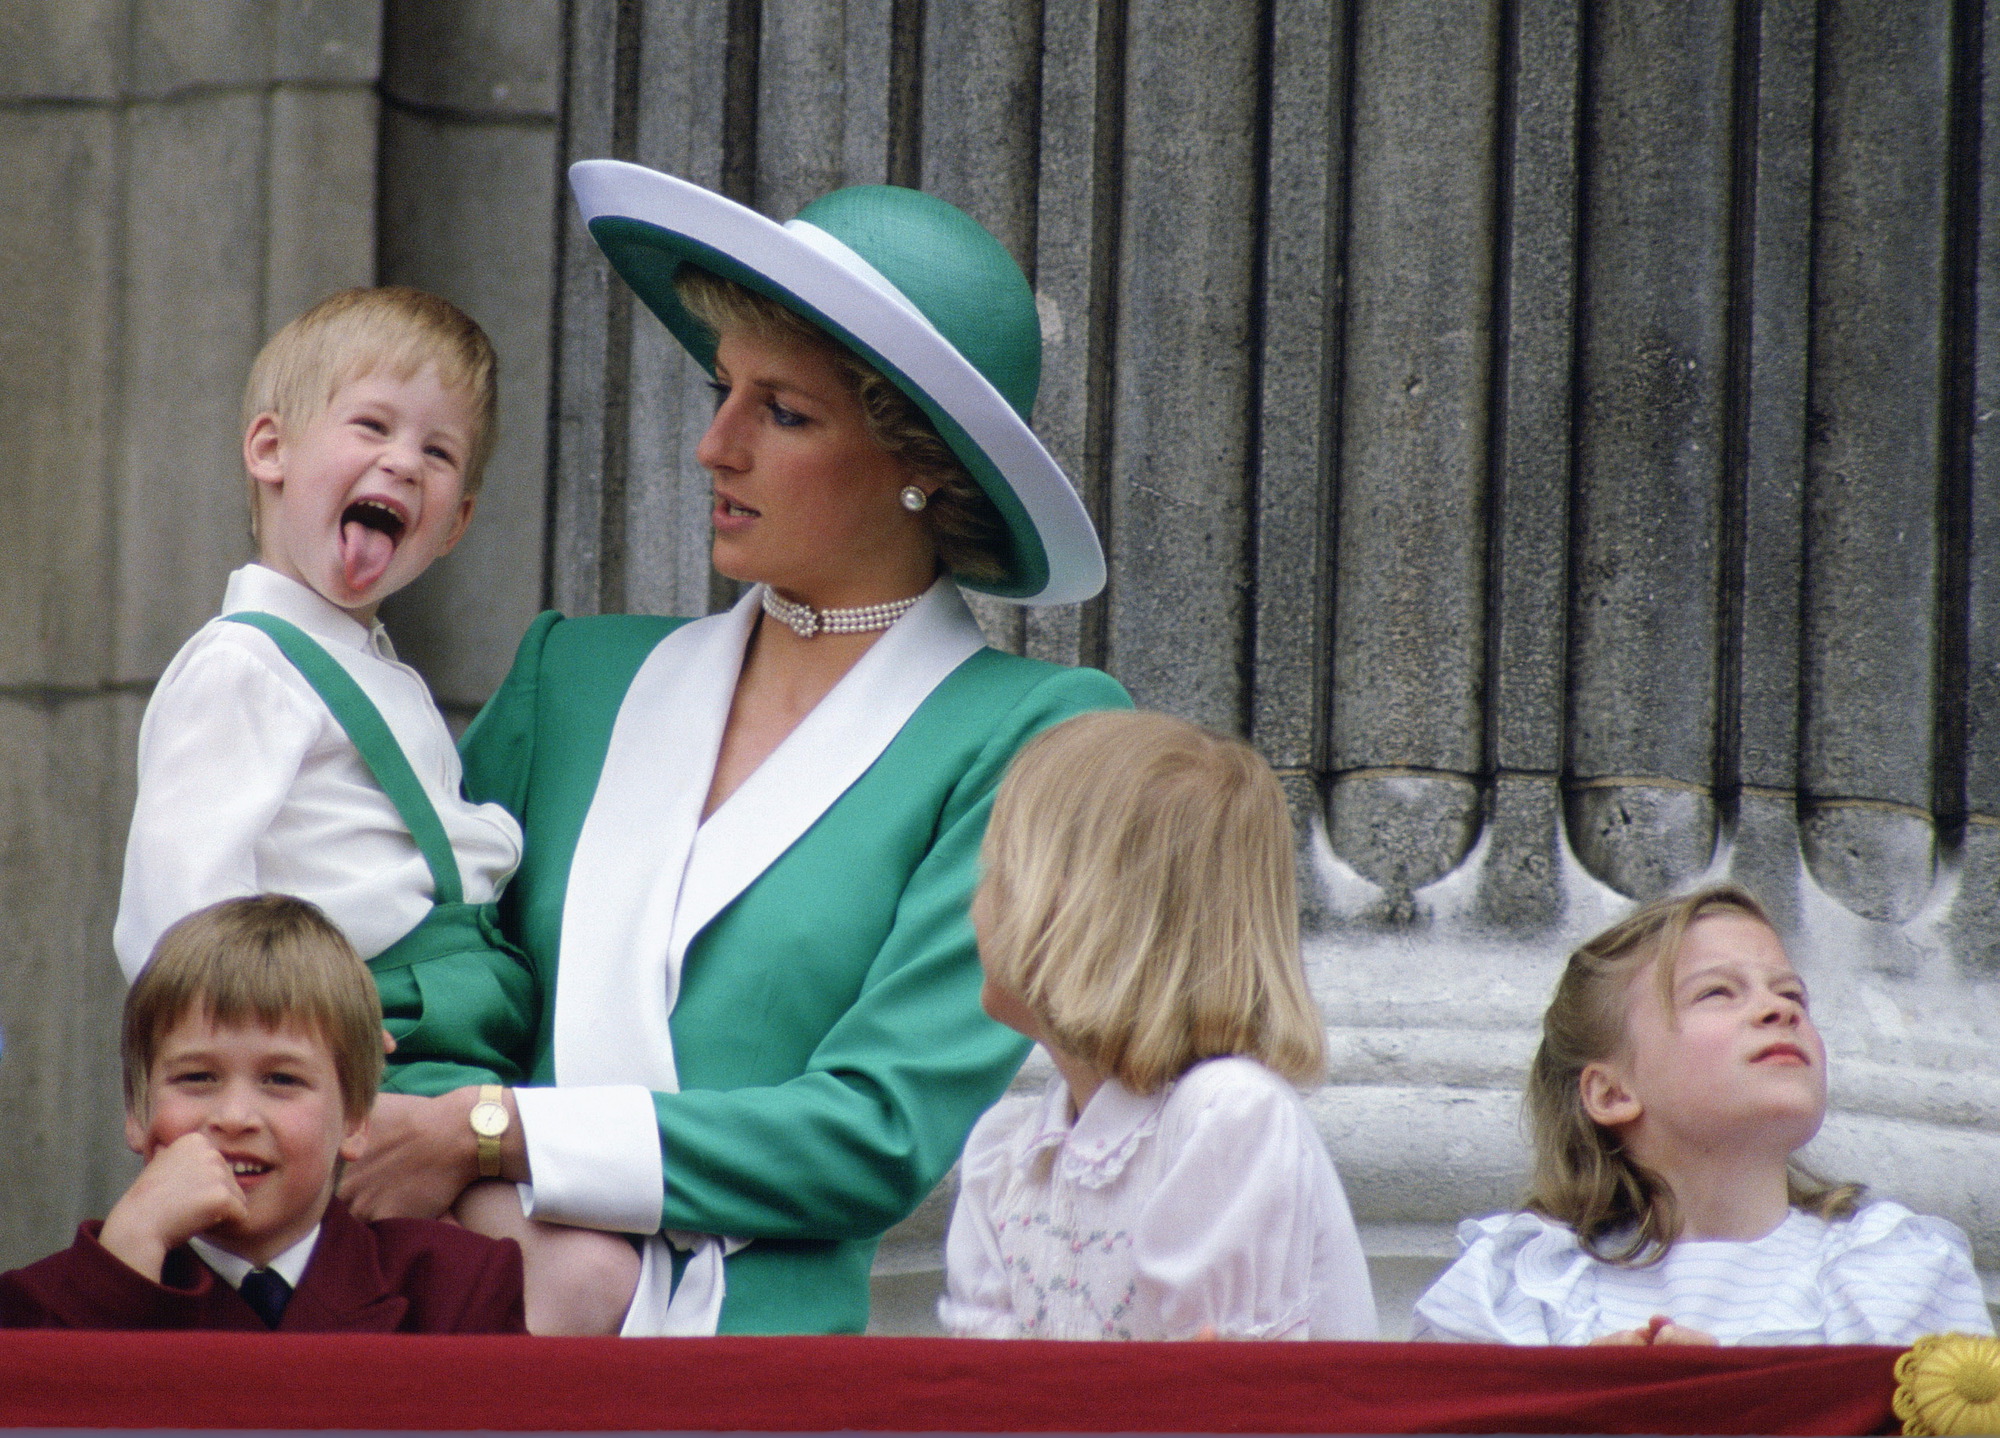 Prince Harry as a young child, sticking out his tongue, while Princess Diana is holding him